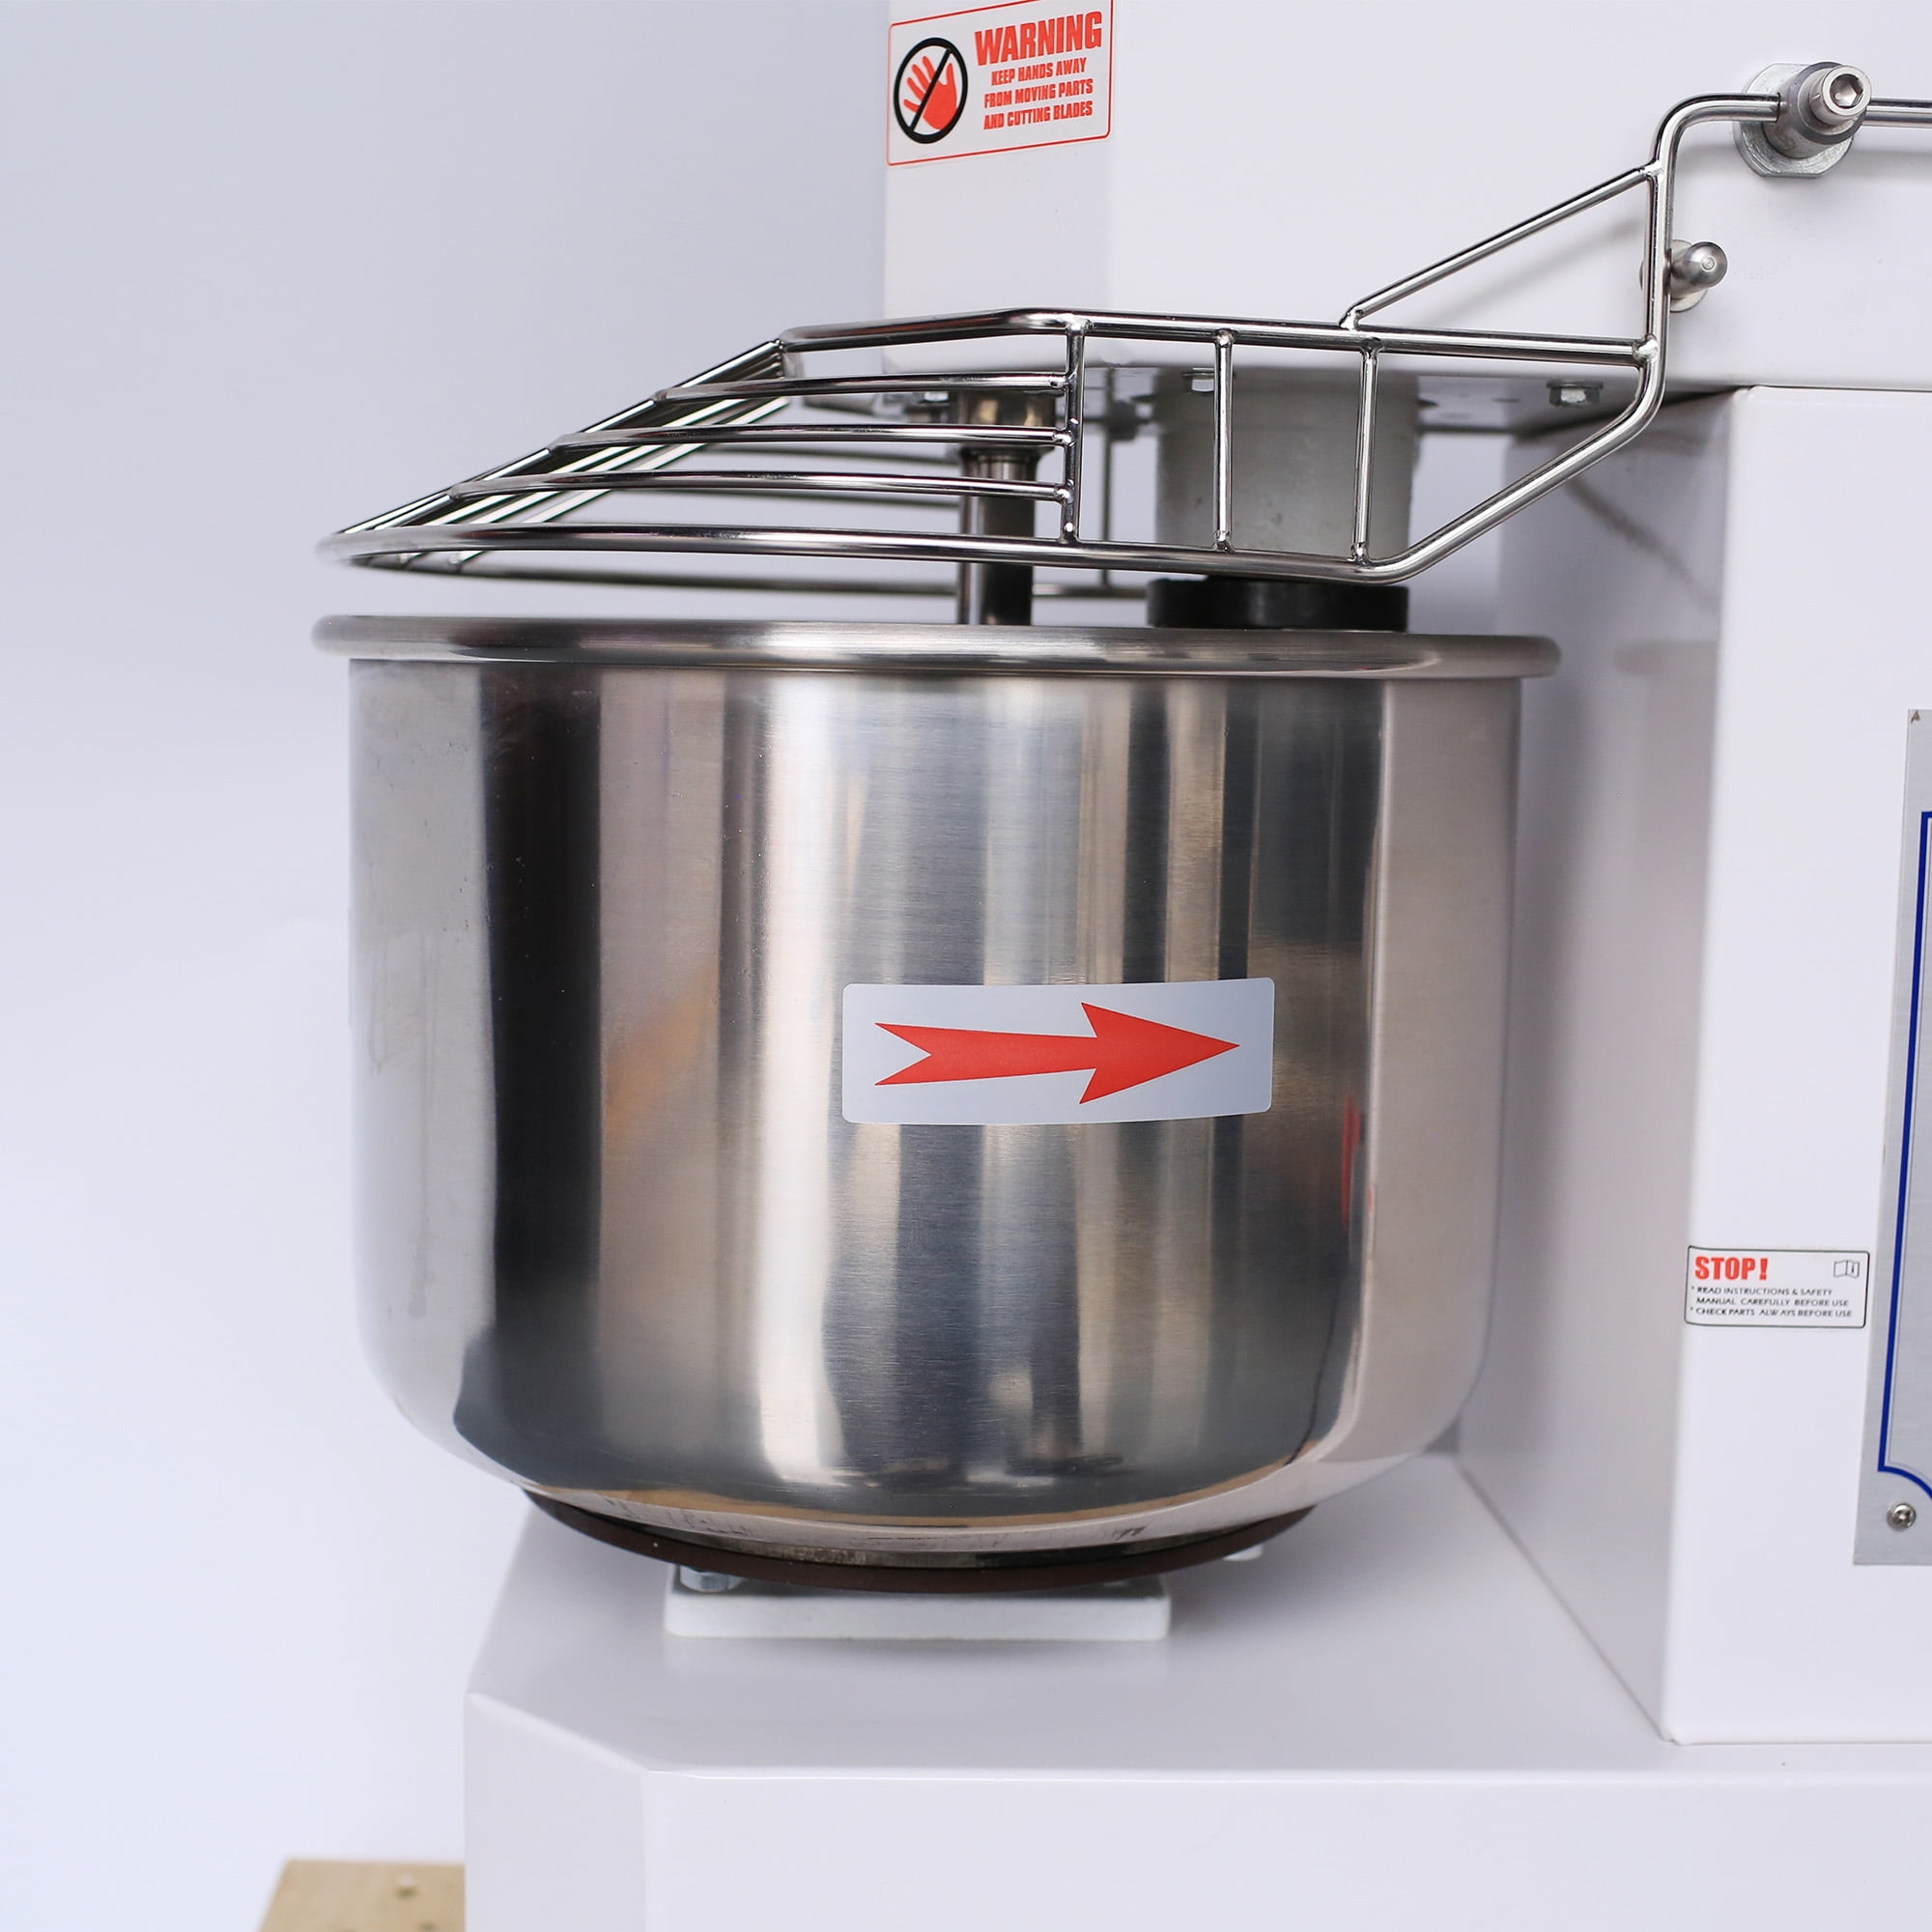 Hakka 10 Quart Commercial PLANETARY Mixers 3 Funtion Stainless Steel Food Mixers